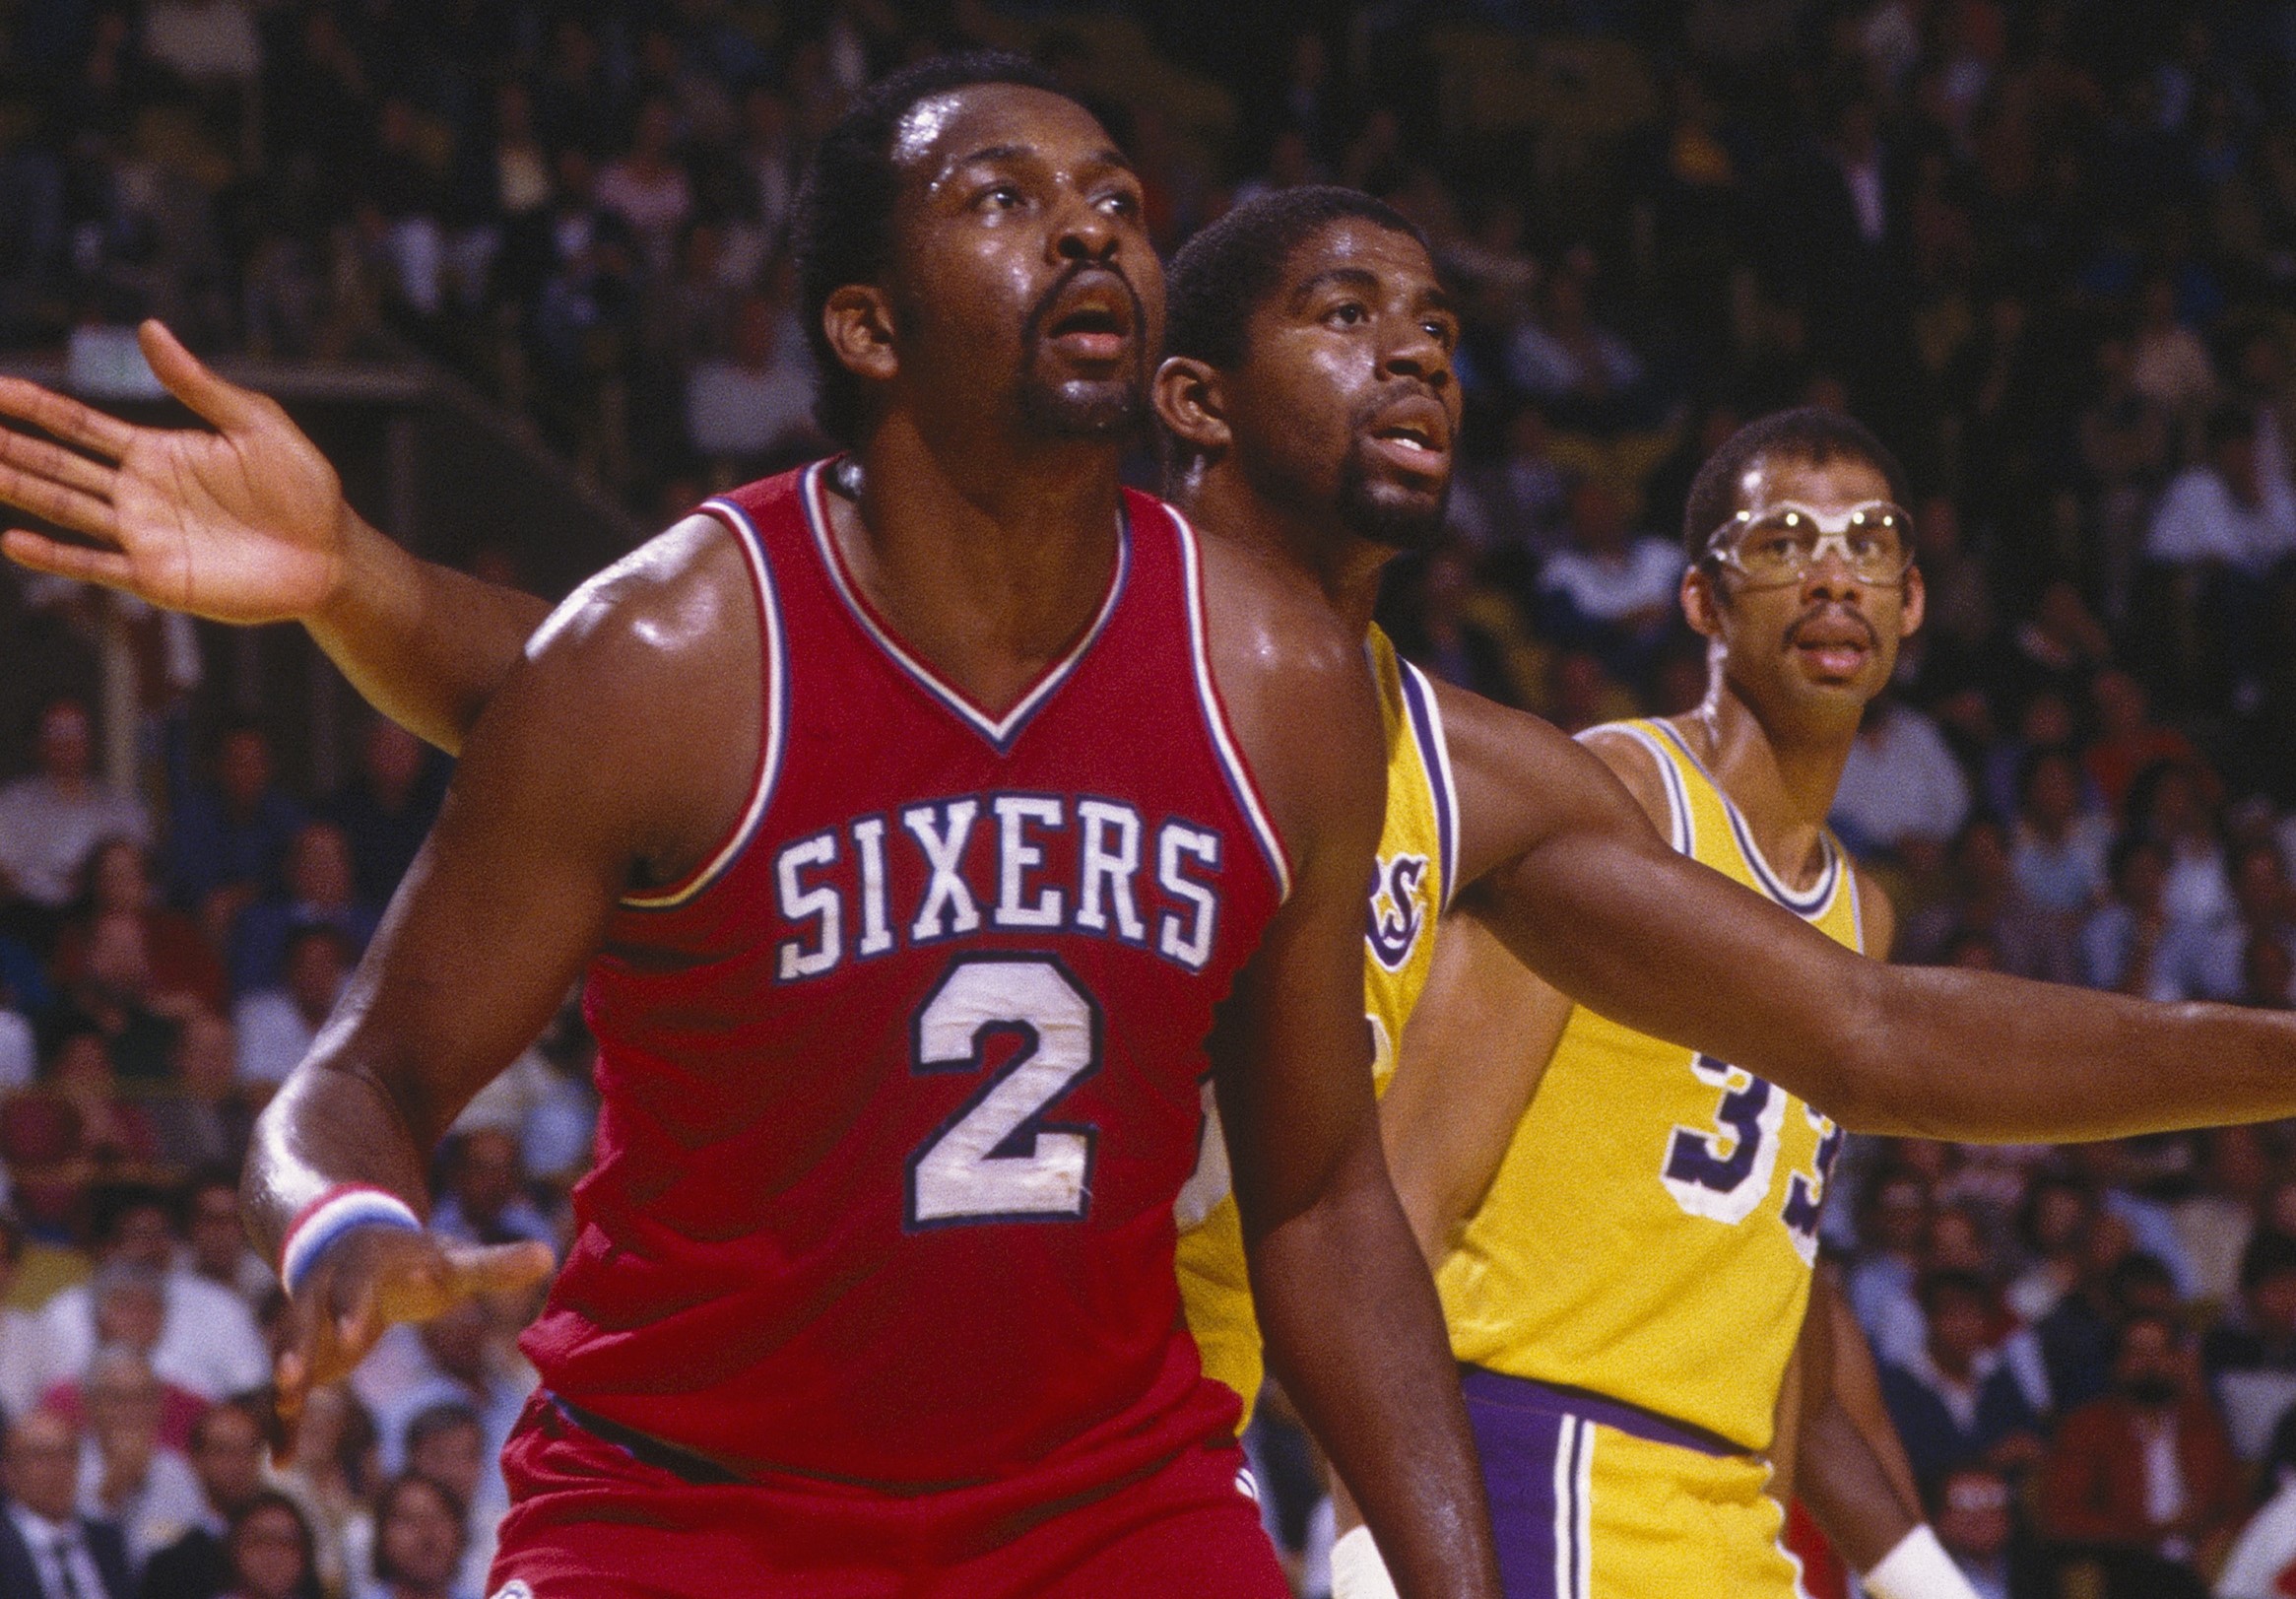 Moses Malone of the Philadelphia 76ers looks for a pass as Magic Johnson of the Los Angeles Lakers guards him.